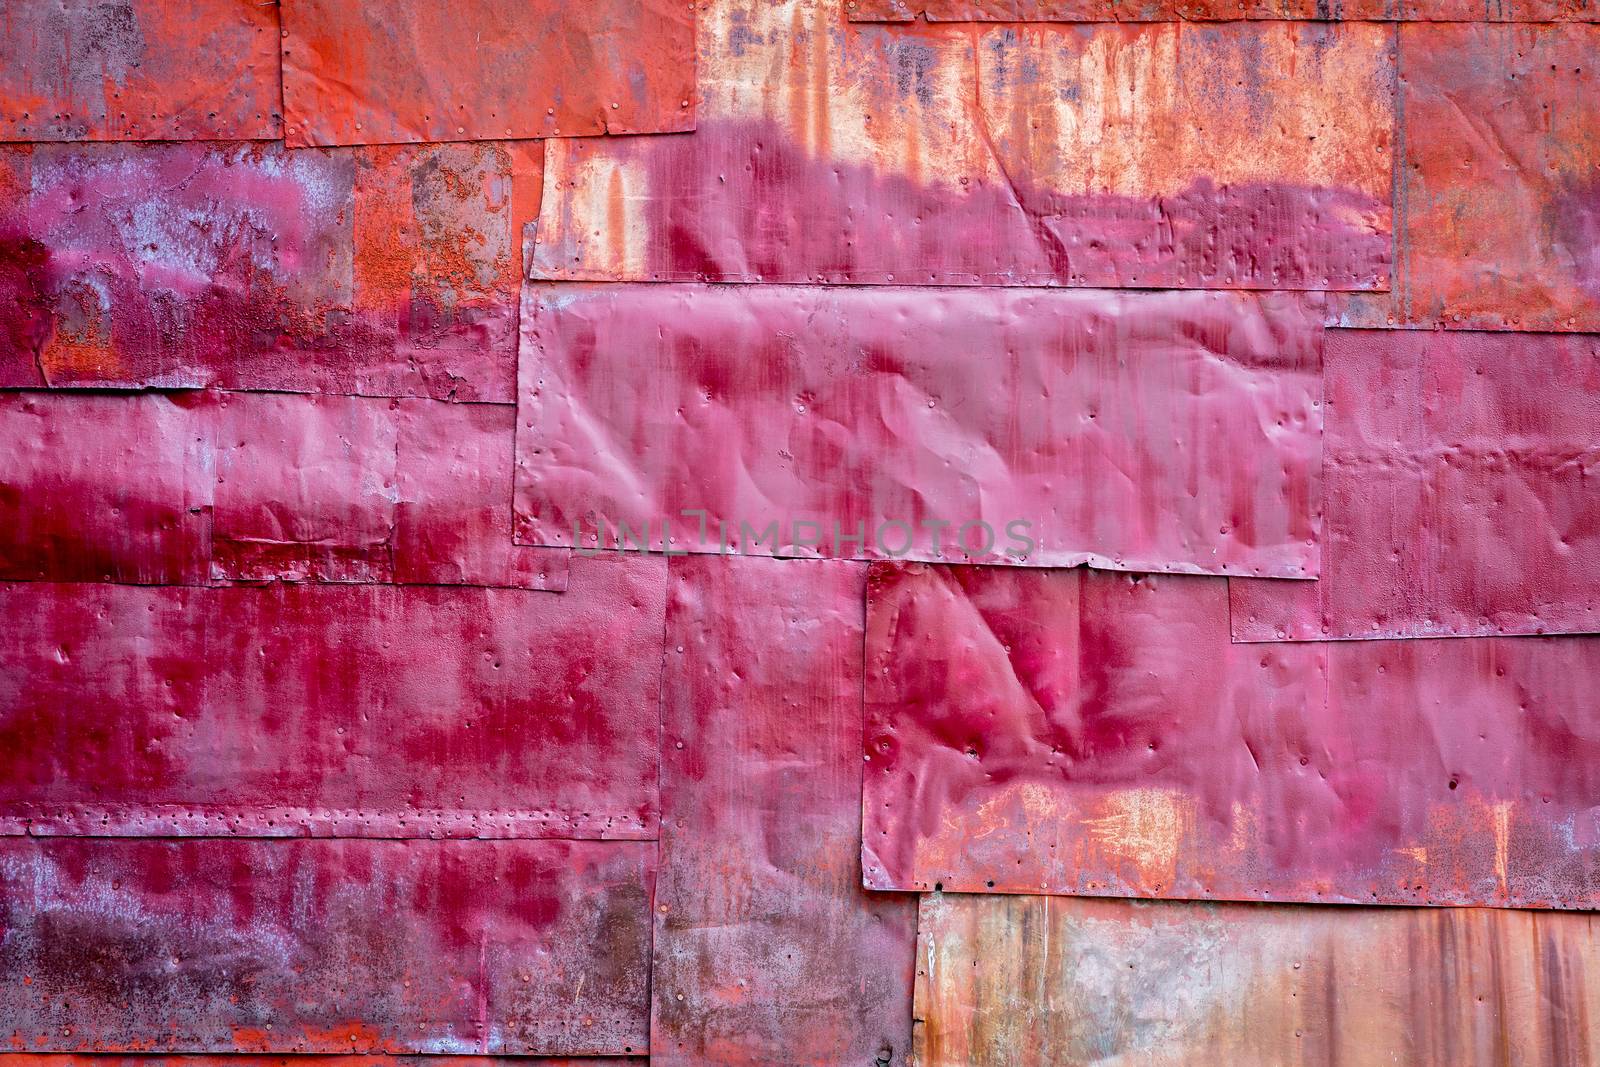 rusty red painted metal background texture - metal sheets covering a wall of an old industrial building